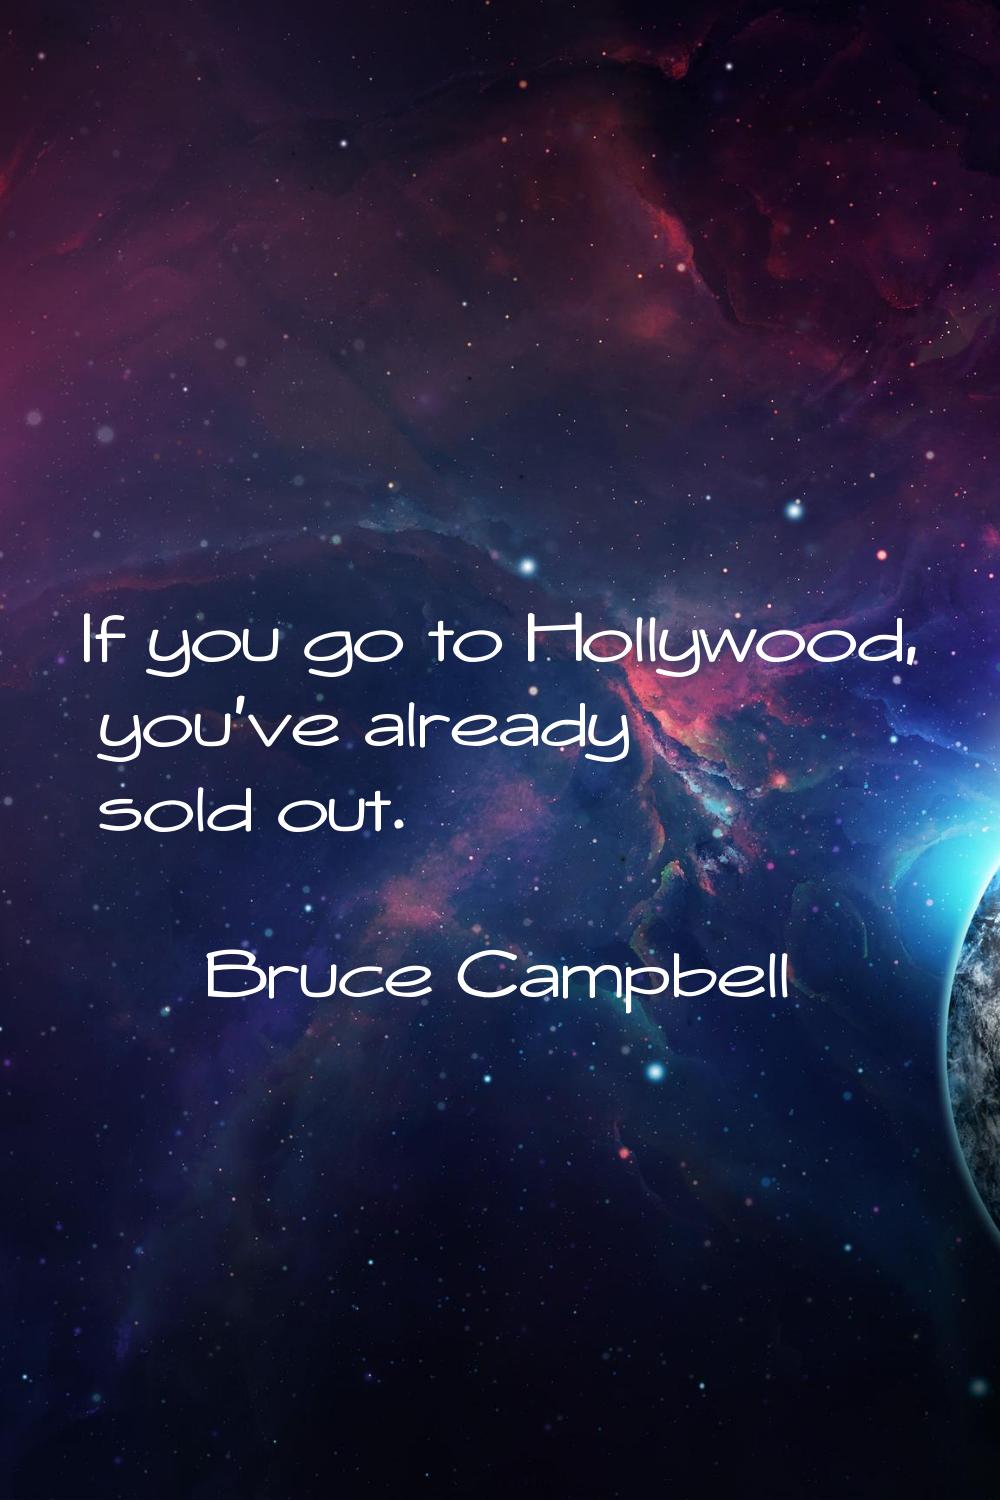 If you go to Hollywood, you've already sold out.